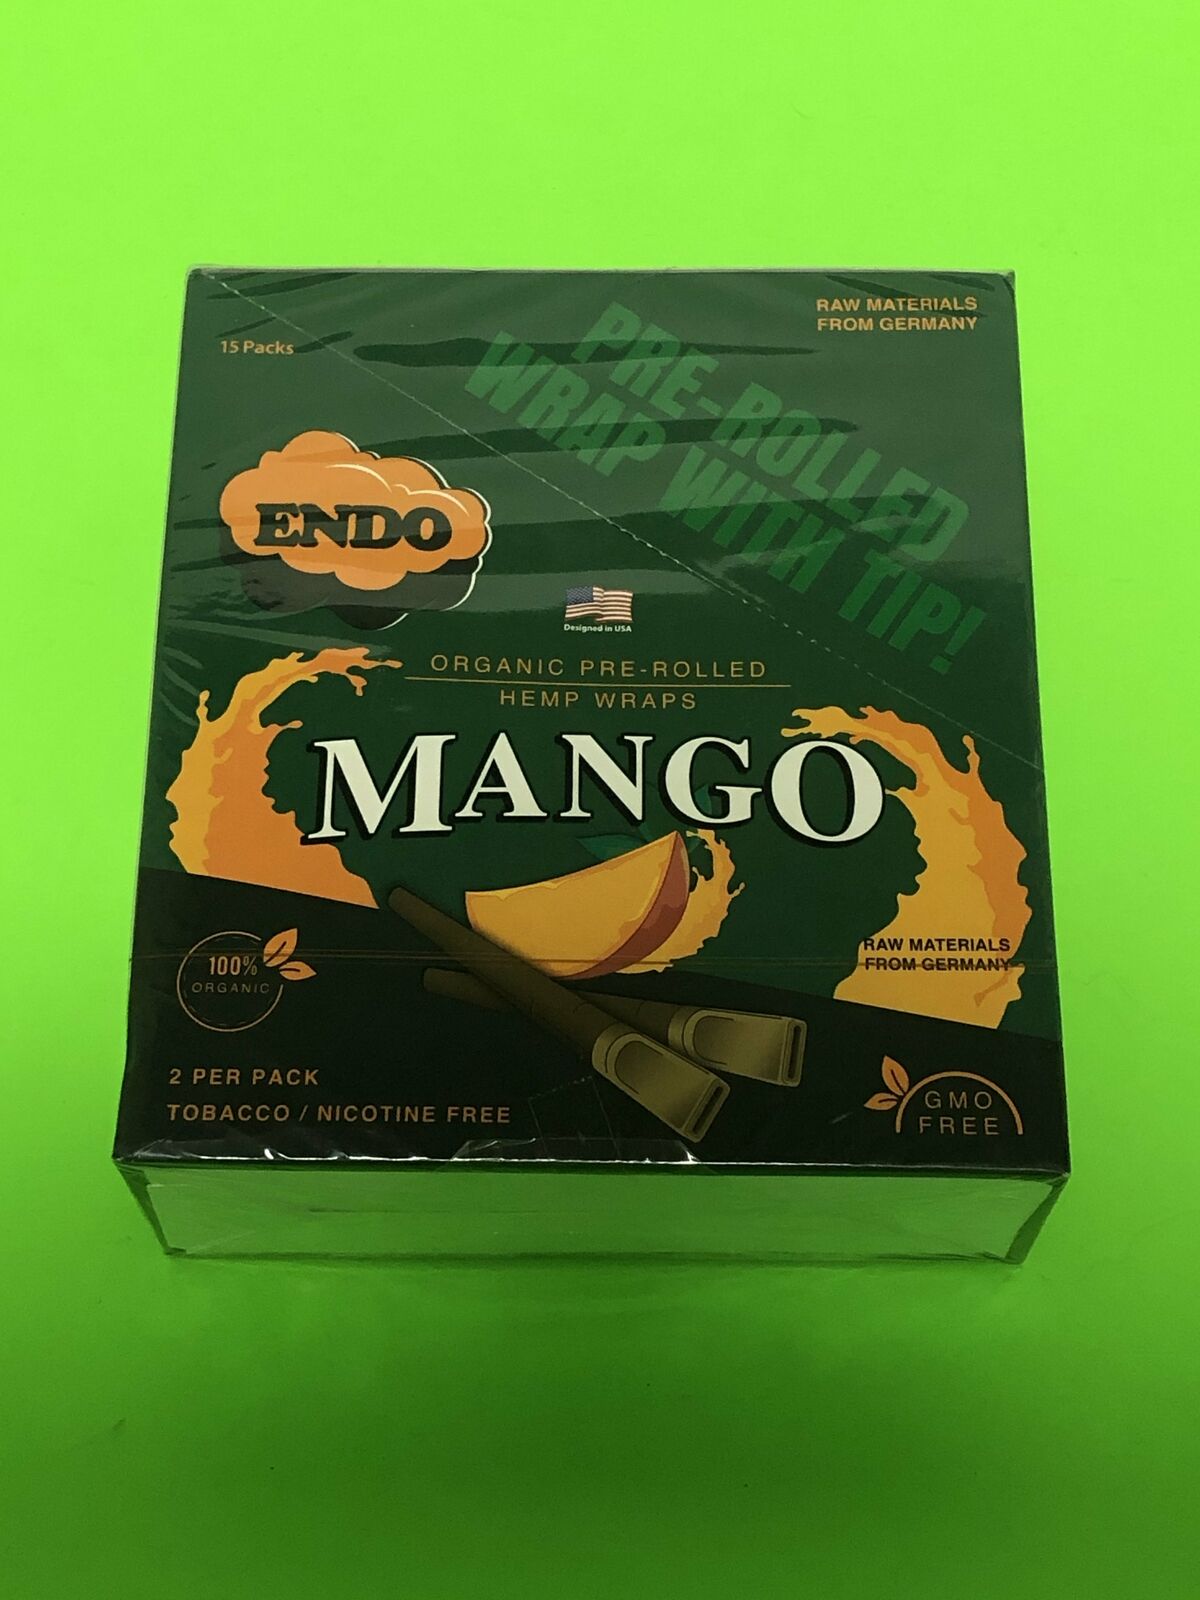 FREE GIFTS🎁Endo Mango🥭High Quality Organic Pre-Rolled🍁Hemp Rolling Papers🔥💨